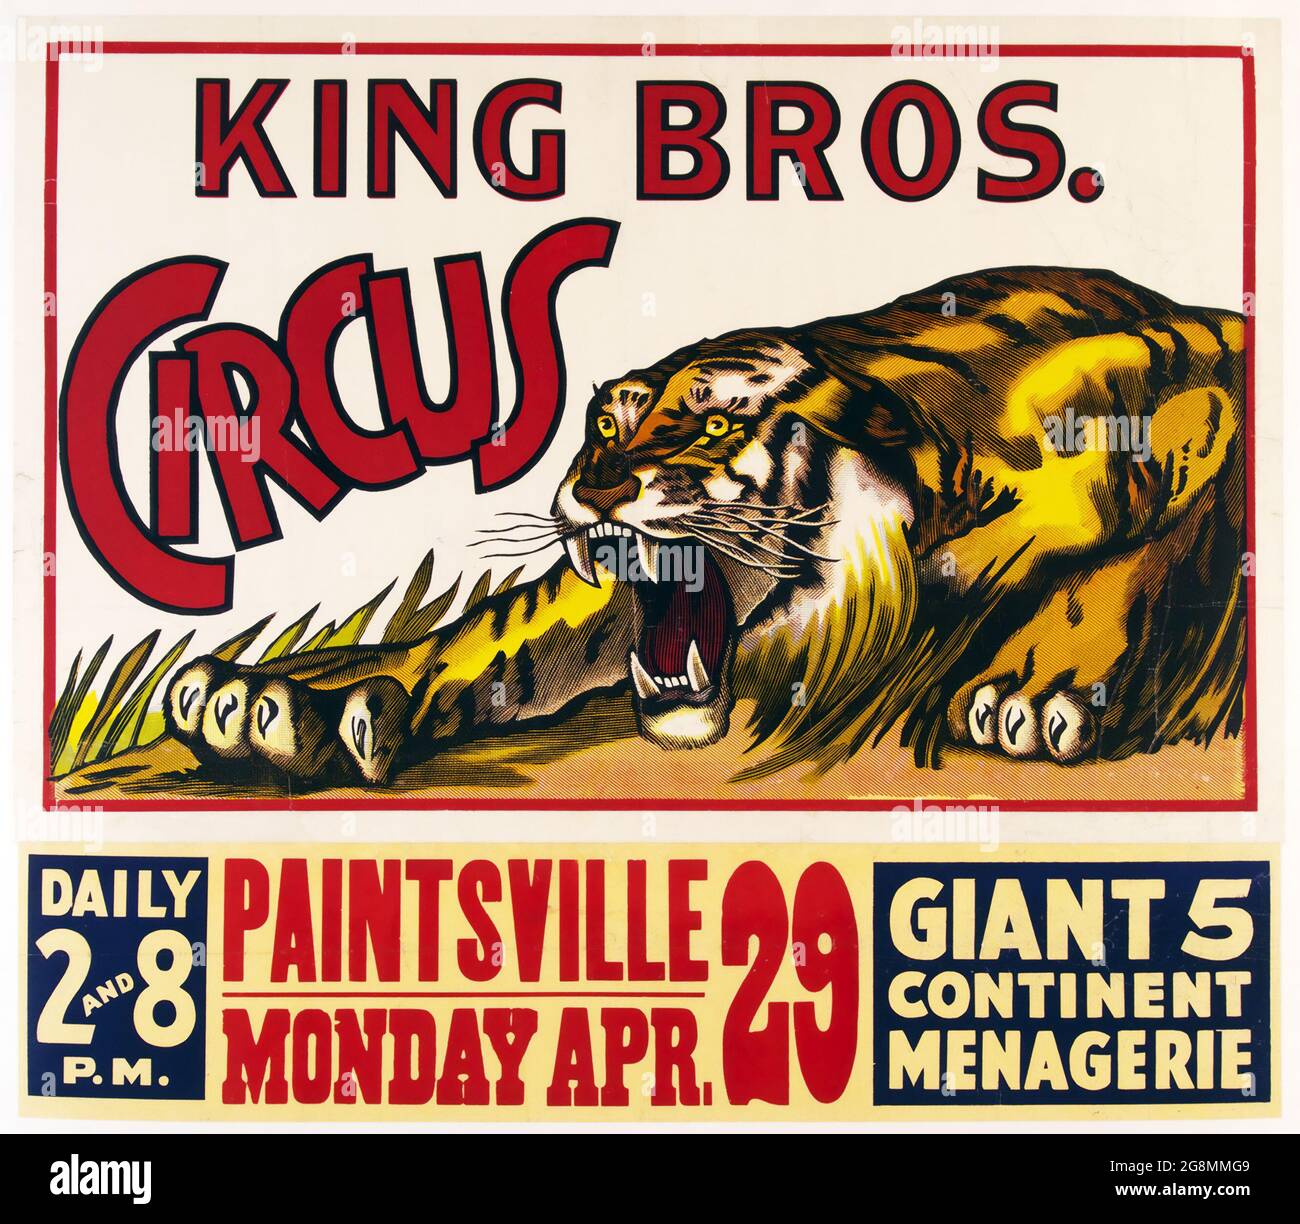 King Bros. Circus. Vintage Circus poster feat. a roaring tiger. Paintsville. Giant 5 continent menagerie. C 1935. Stock Photo